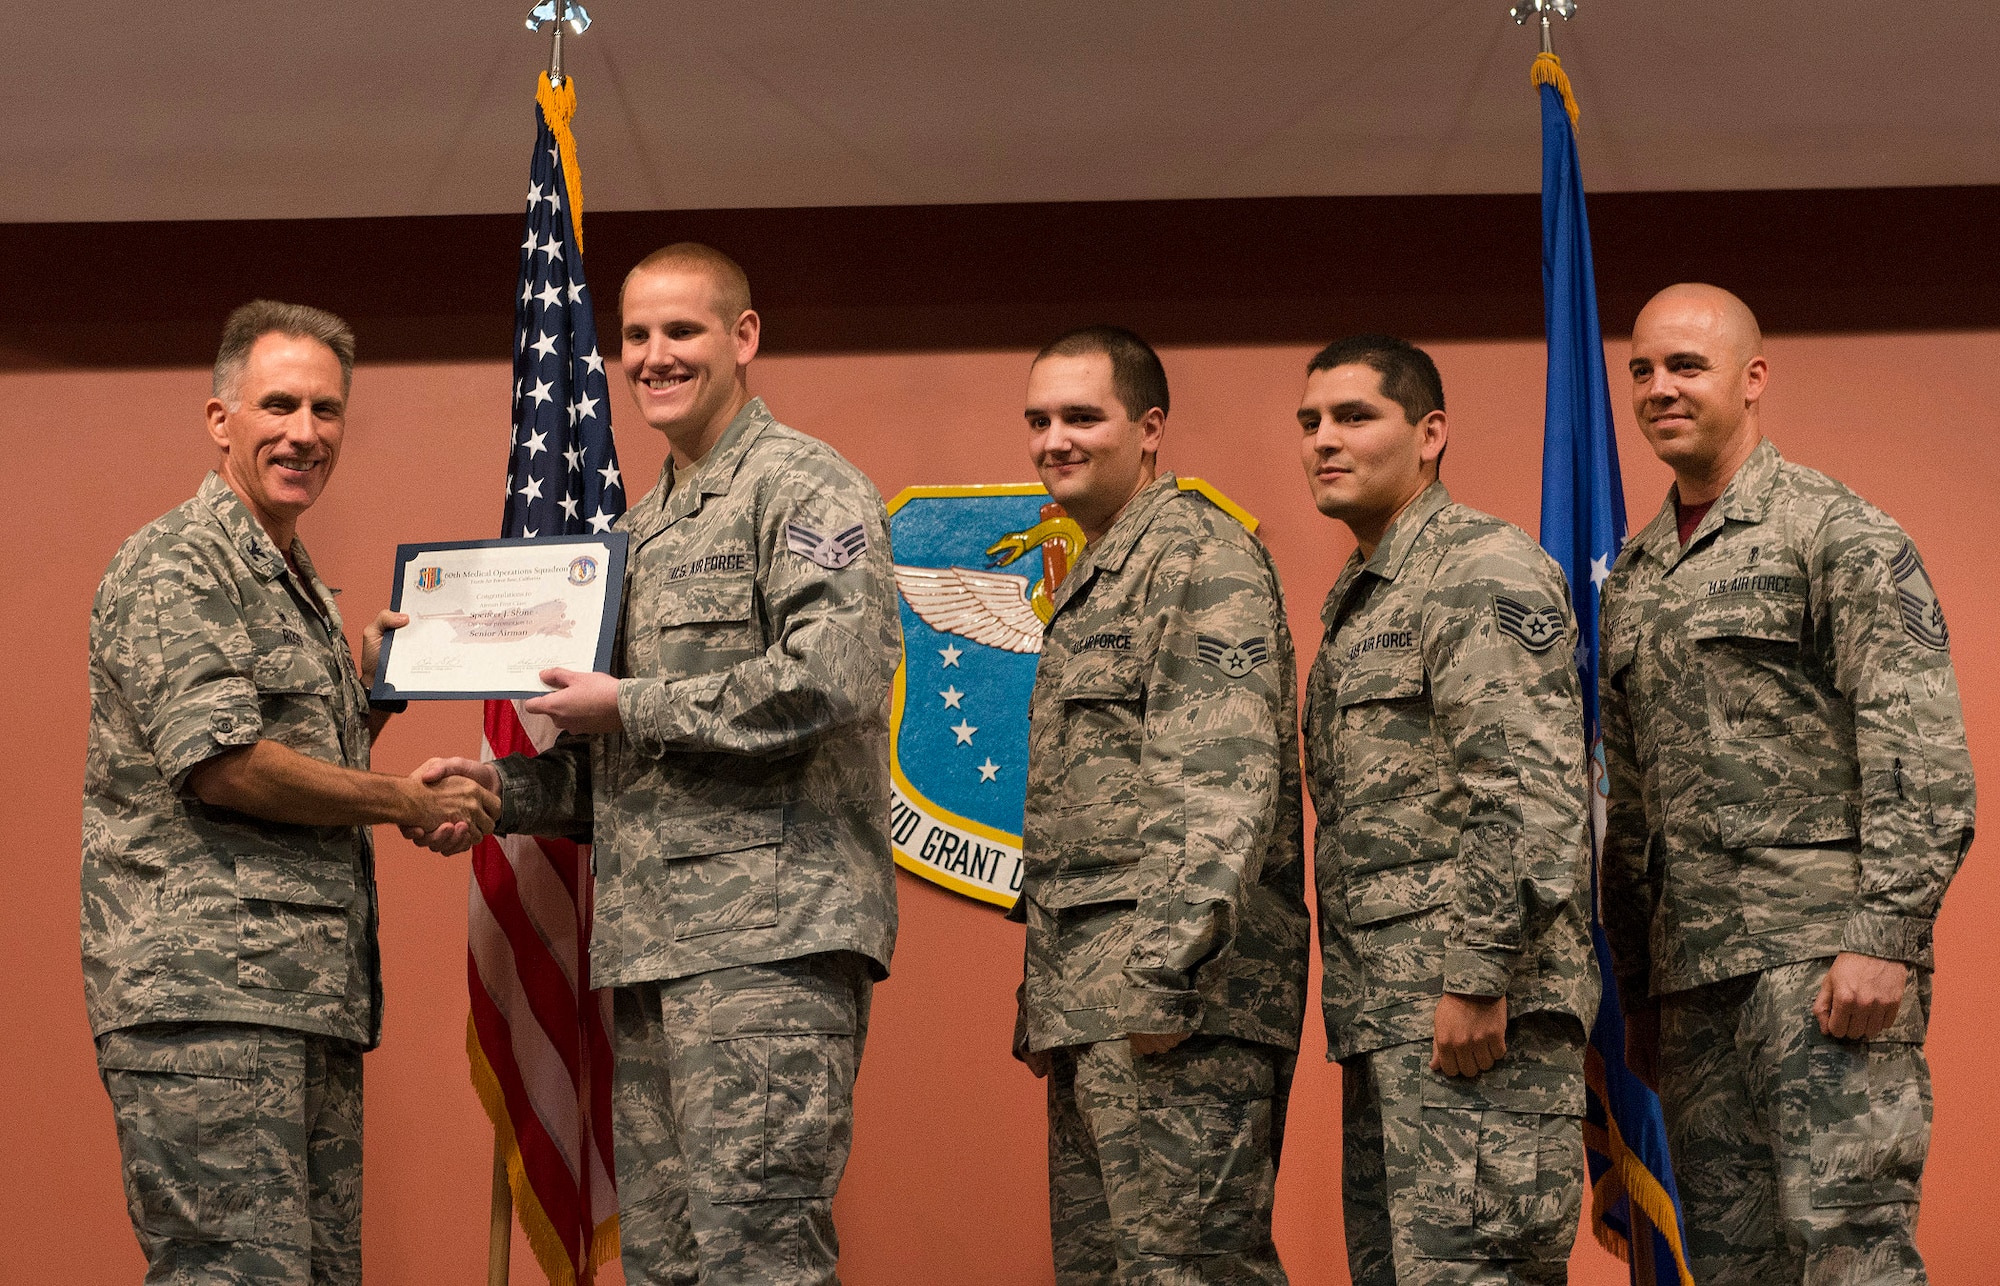 Col. Michael Ross, the 60th Medical Operations Squadron commander, presents Airman 1st Class Spencer Stone, a 60th Medical Operations Squadron medical technician, with a promotion certificate. Stone was promoted to senior airman at Travis Air Force Base, Calif., Oct. 30, 2015. Senior Airman Benjamin Kovacevic, Staff Sgt. Roberto Davila, and Chief Master Sgt. Oren Sieff, all from the 60th Medical Group, tacked on Stone's new stripes during a group promotion ceremony at David Grant U.S. Air Force Medical Center. Following his promotion, Stone was promoted to the rank of staff sergeant, effective Nov. 1, by order of Air Force Chief of Staff Gen. Mark A. Welsh III. According to Air Force Instruction 36-502, the chief of staff of the Air Force has the authority to promote any enlisted member to the next higher grade. (U.S. Air Force photo/T.C. Perkins Jr.)